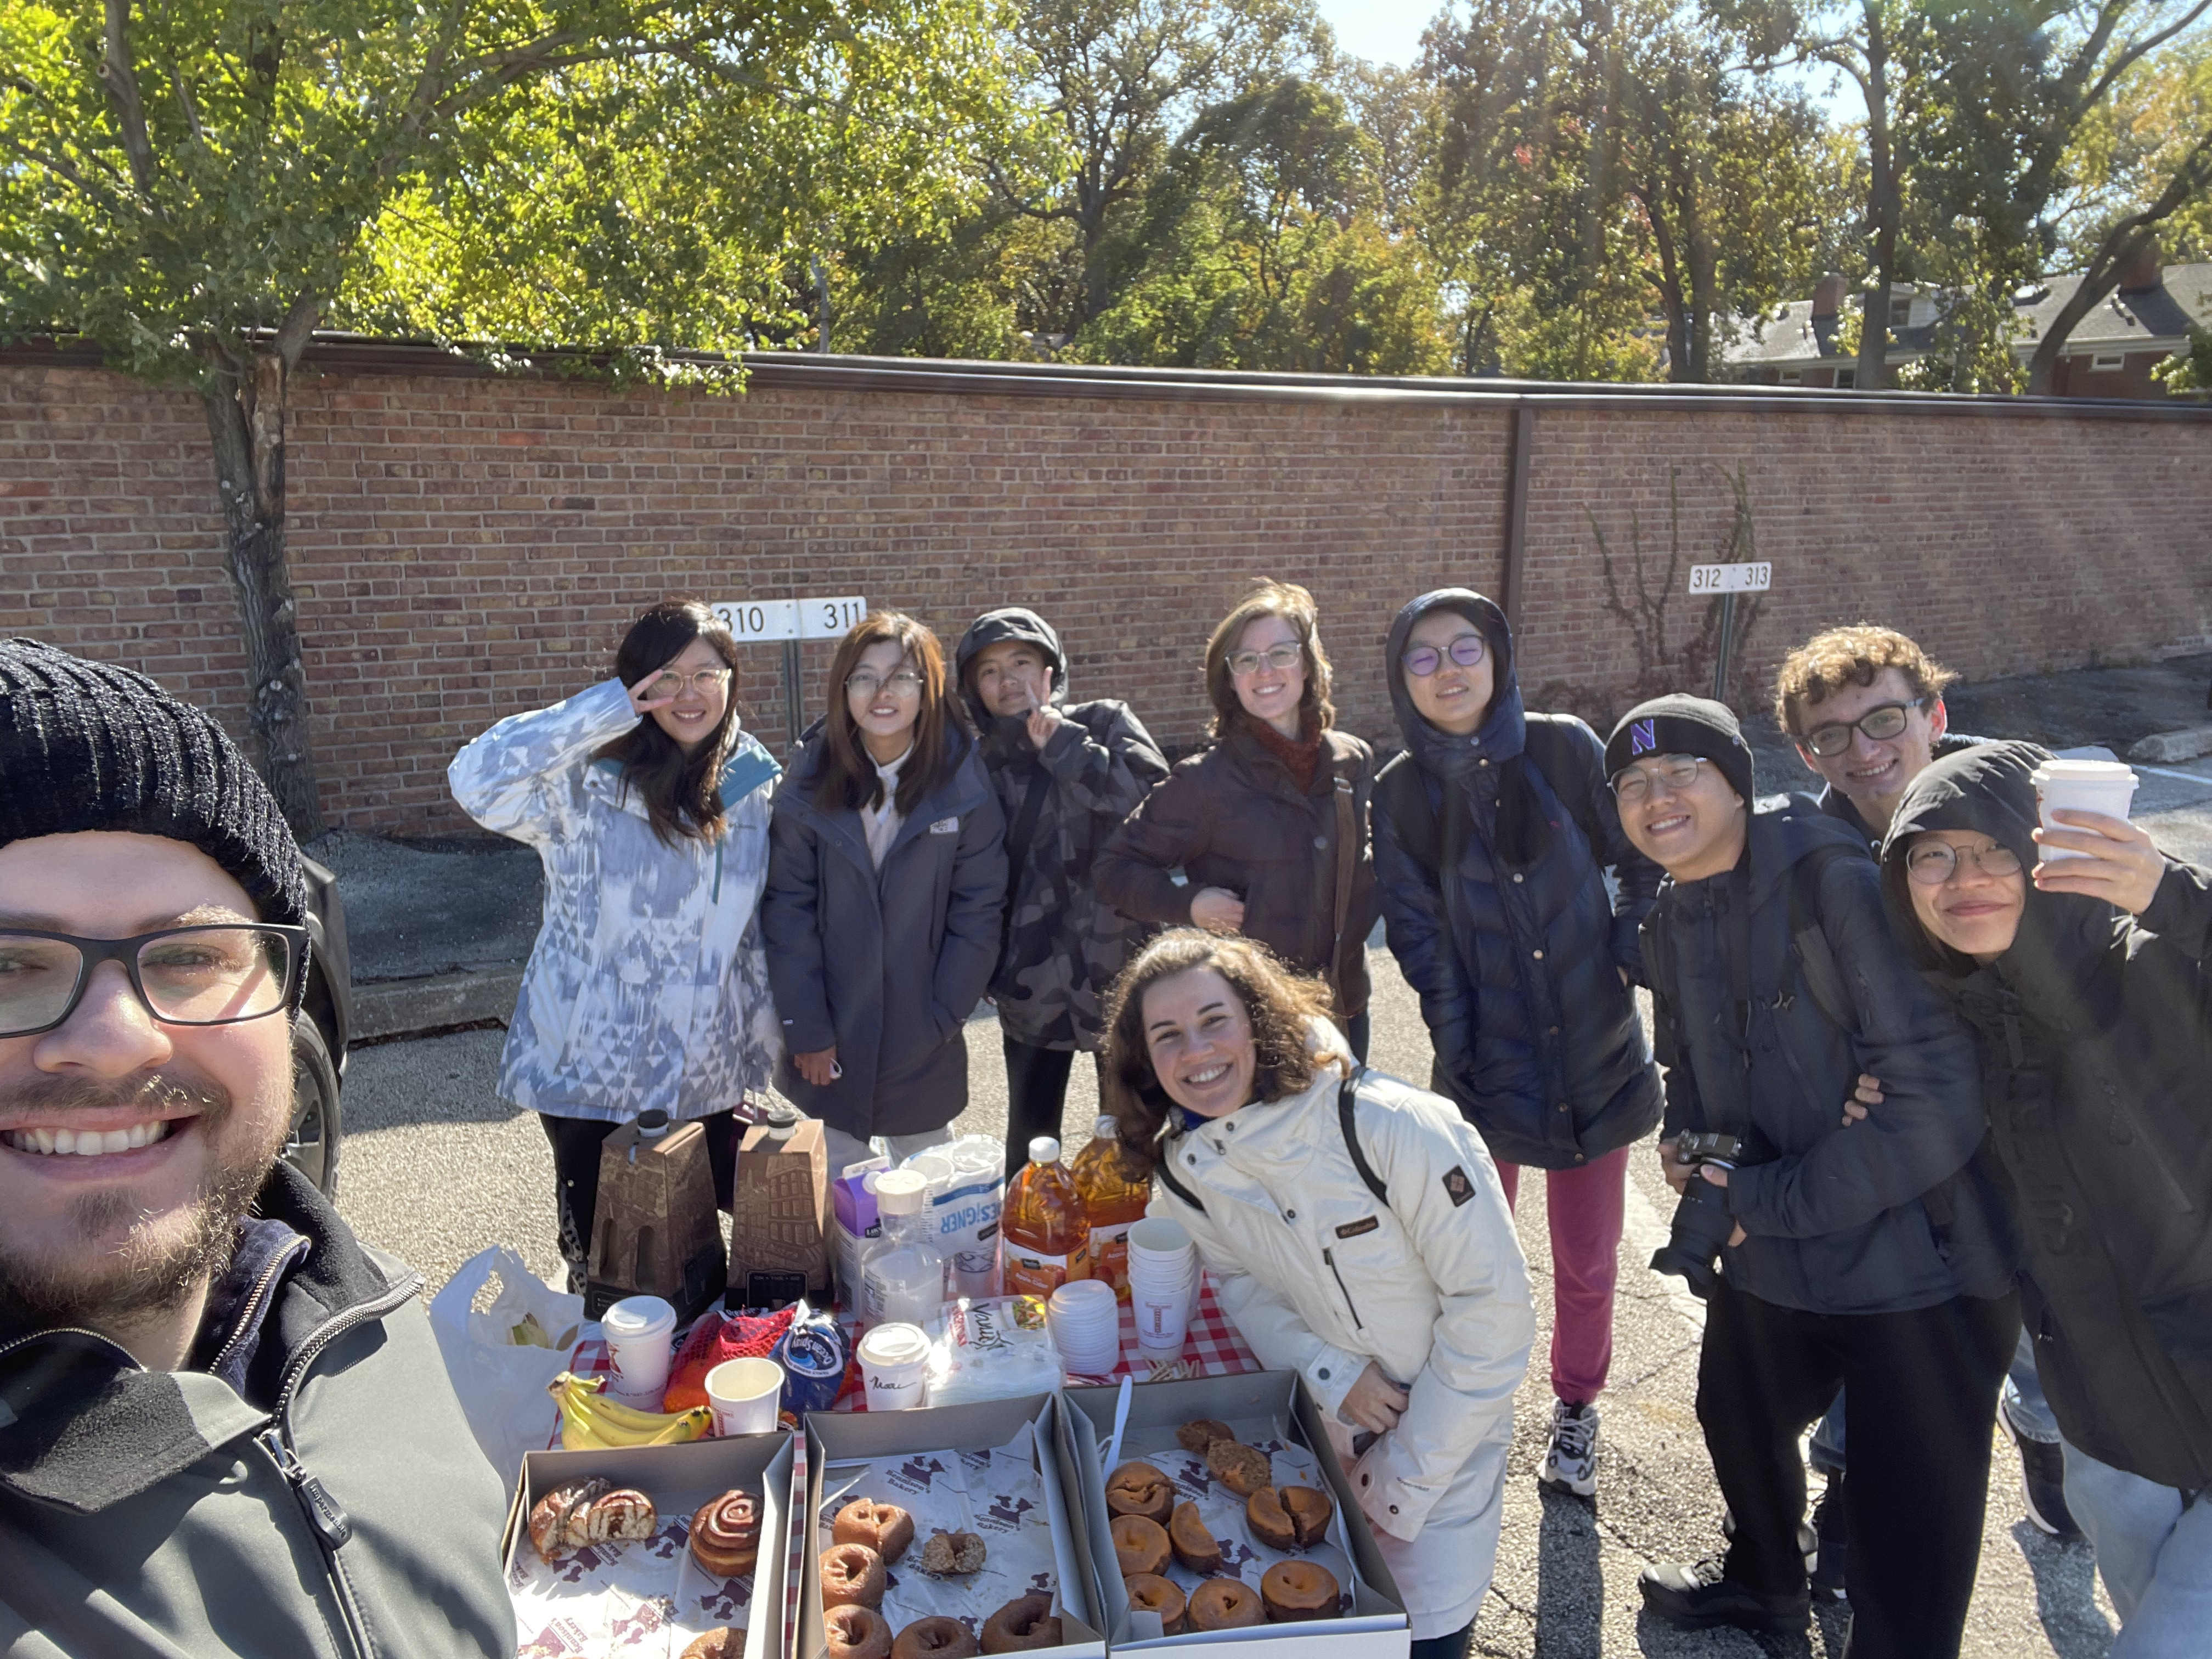 A group of PhD students in front of a table of pastries outside, smiling at the camera.